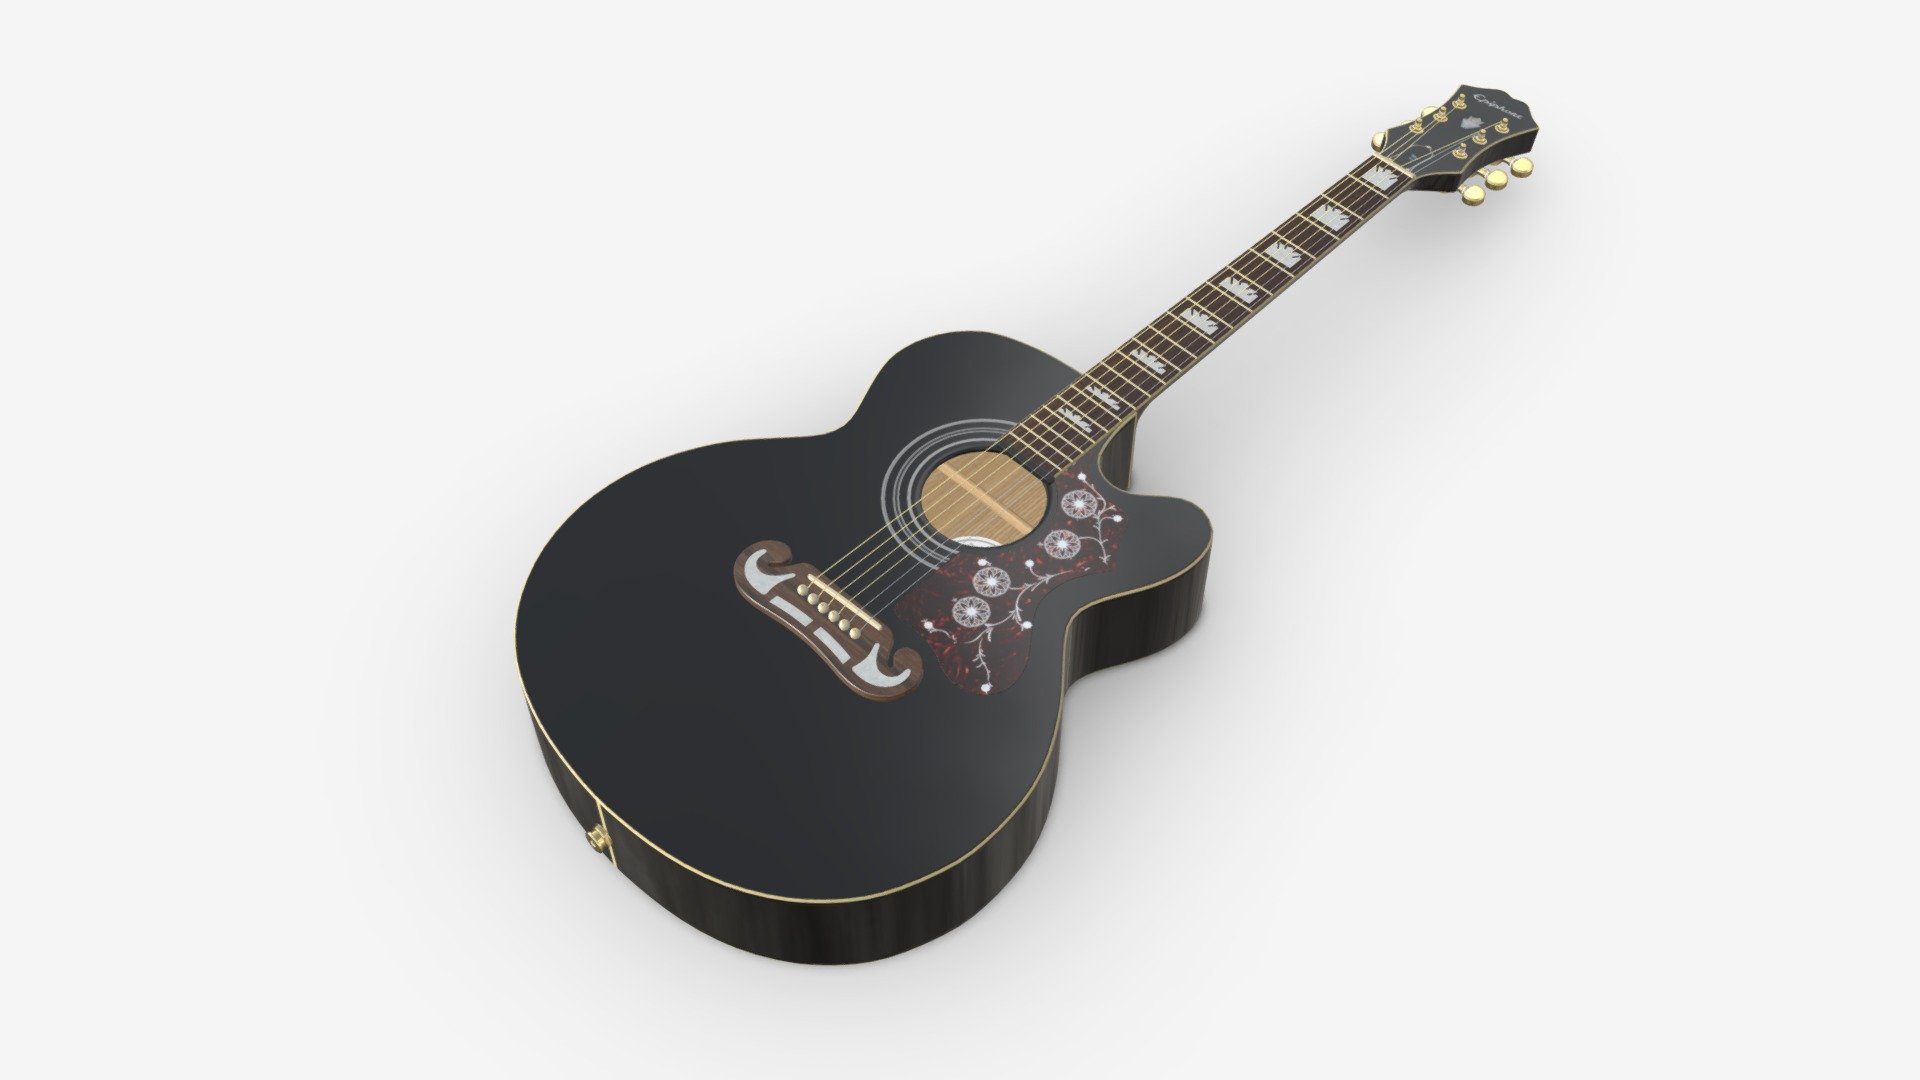 Epiphone J-200 EC acoustic guitar with pickup - Buy Royalty Free 3D model by HQ3DMOD (@AivisAstics) 3d model